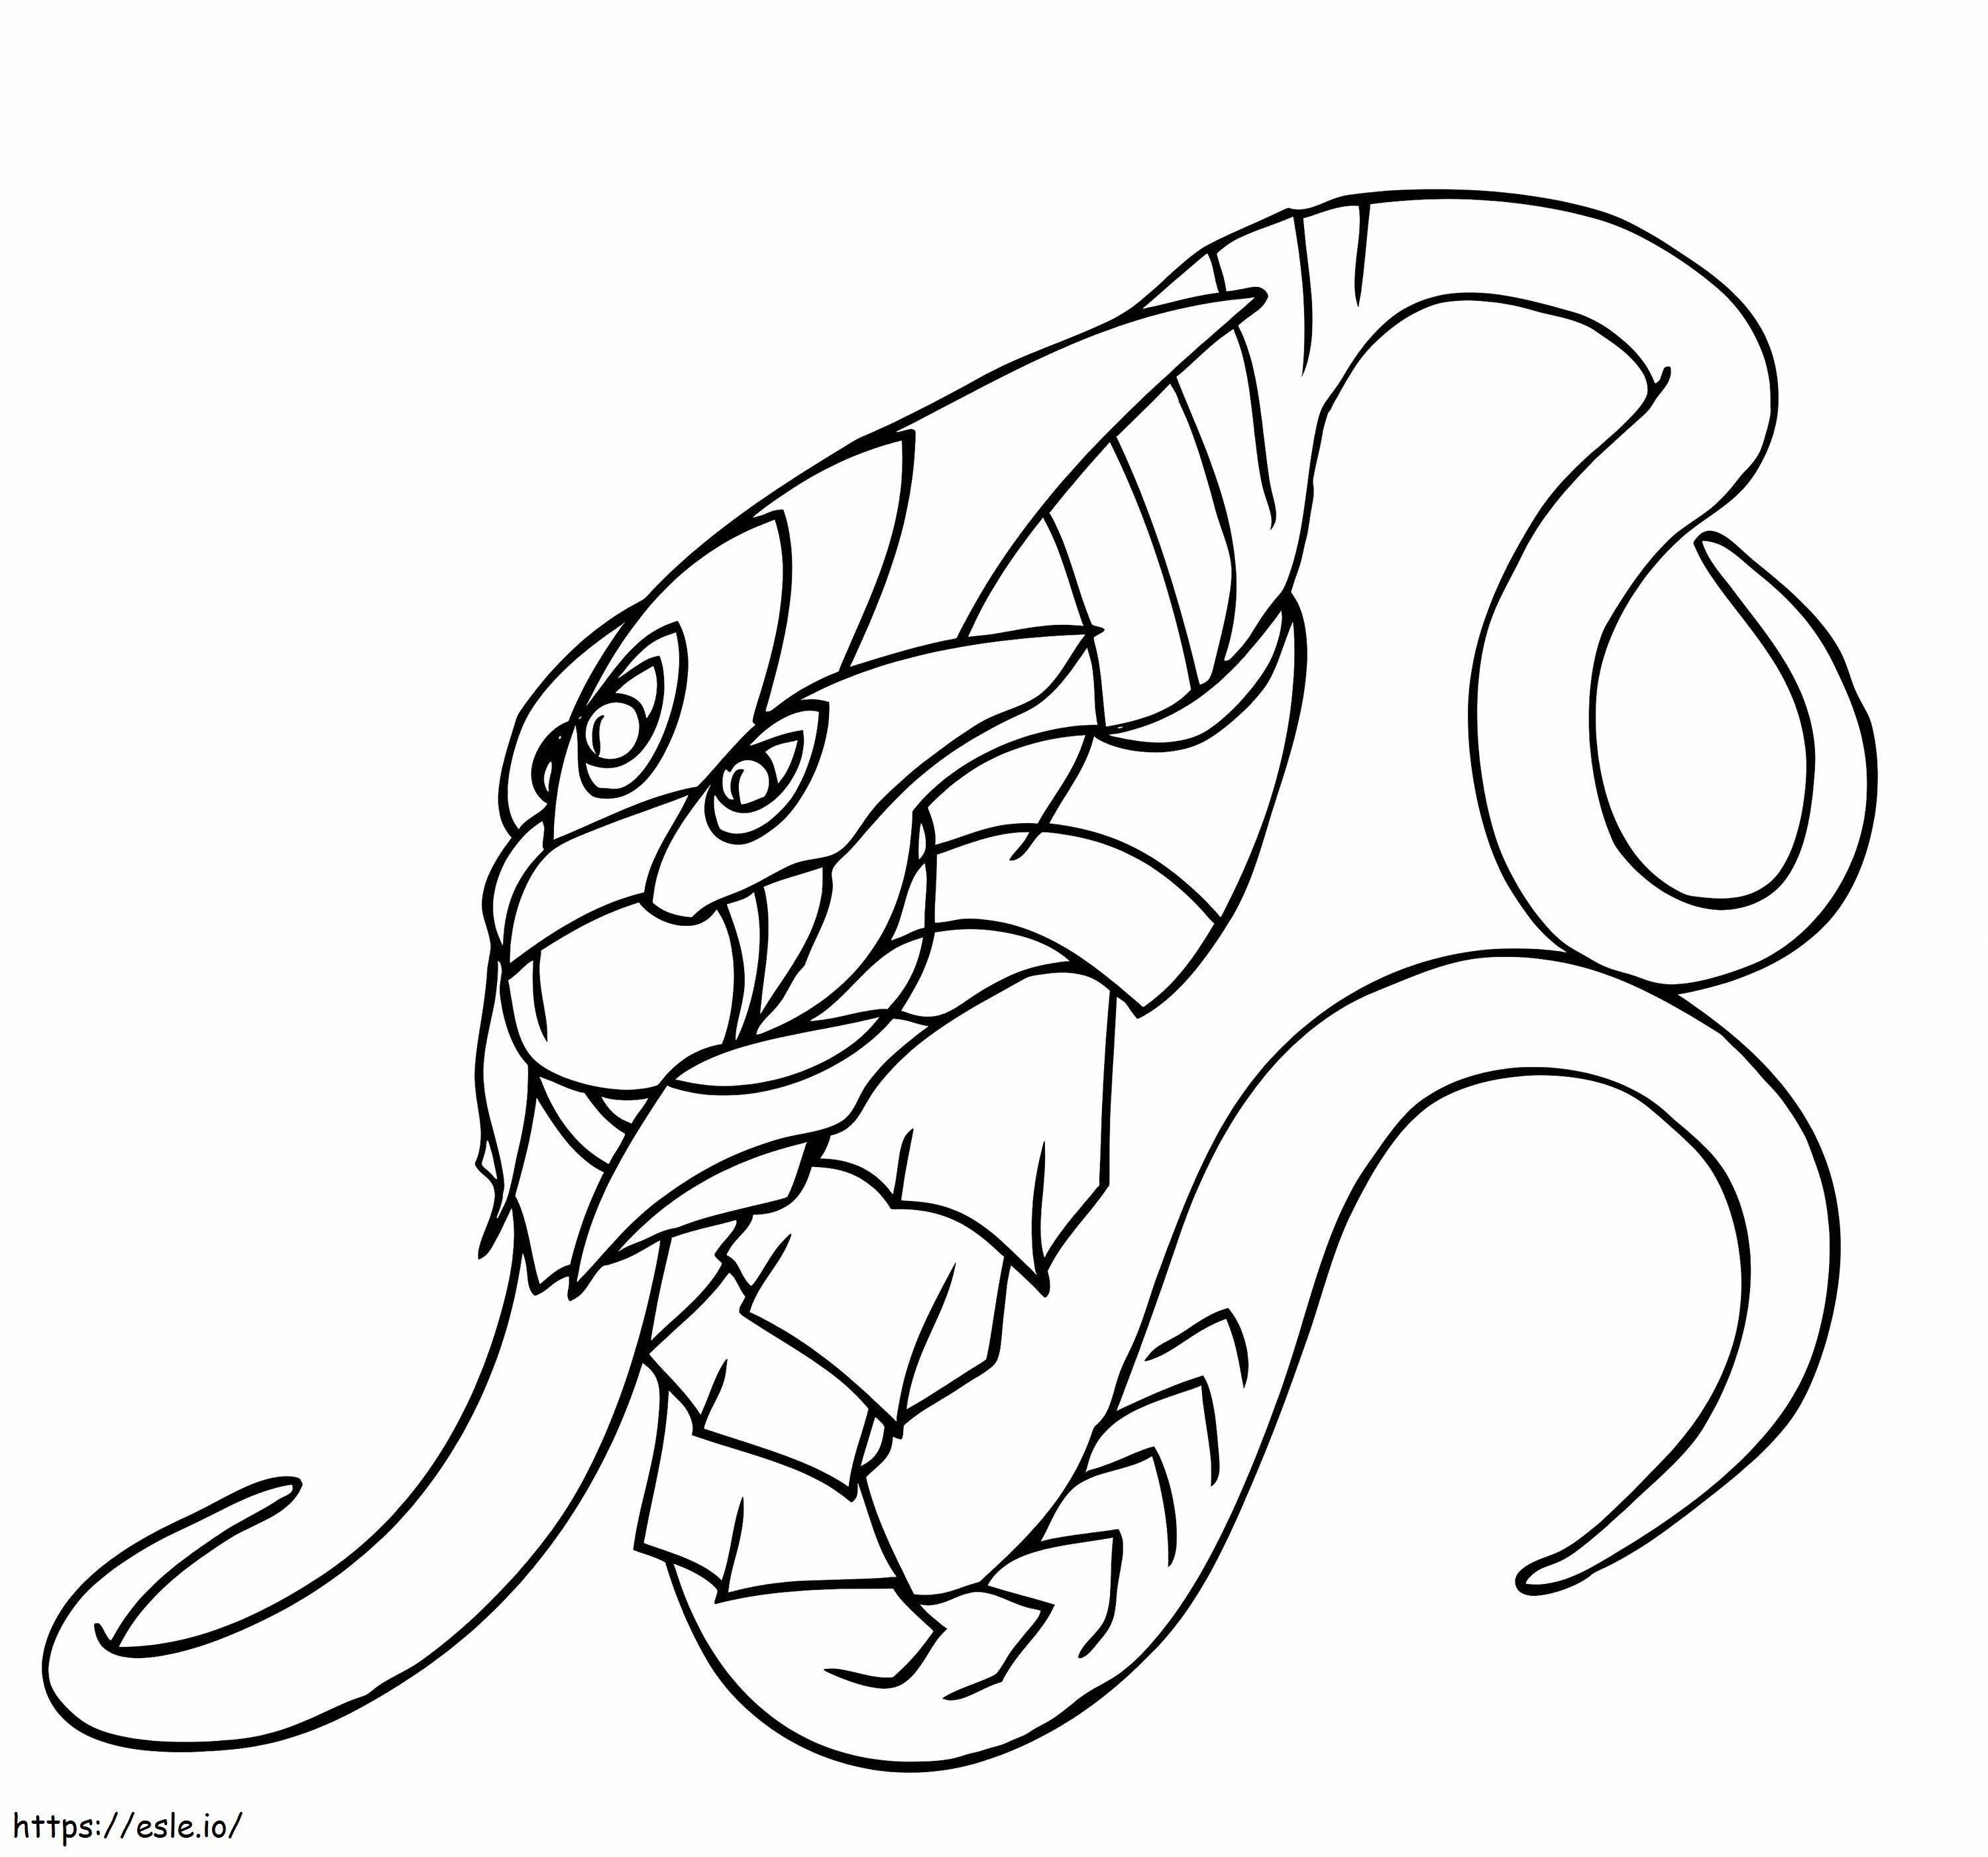 1560849670 Velkoz A4 coloring page